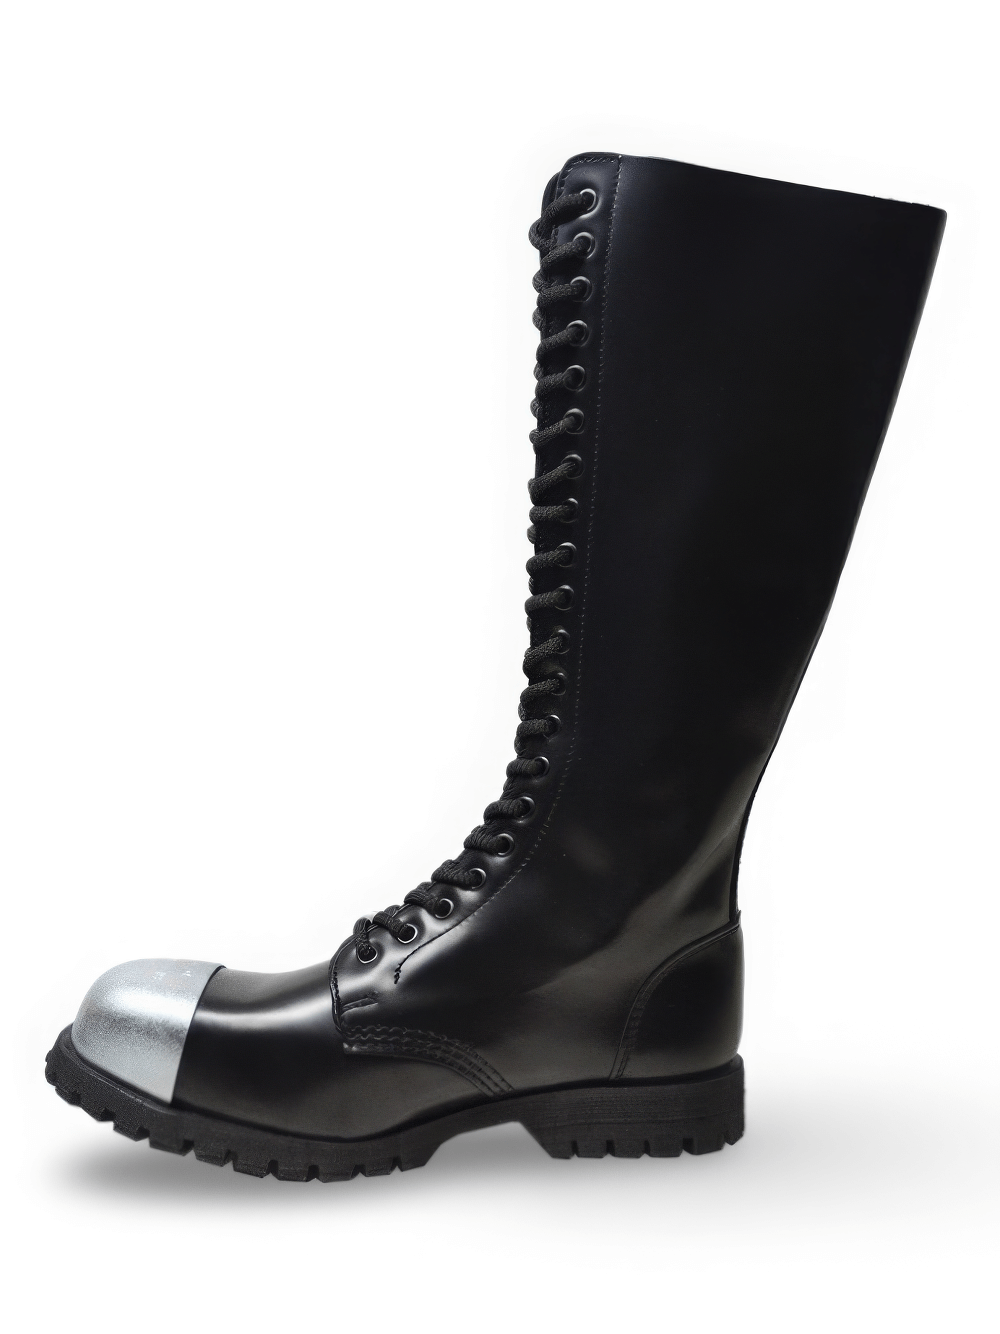 Black 20-Hole Rangers with Steel Toe and Wedge Soles